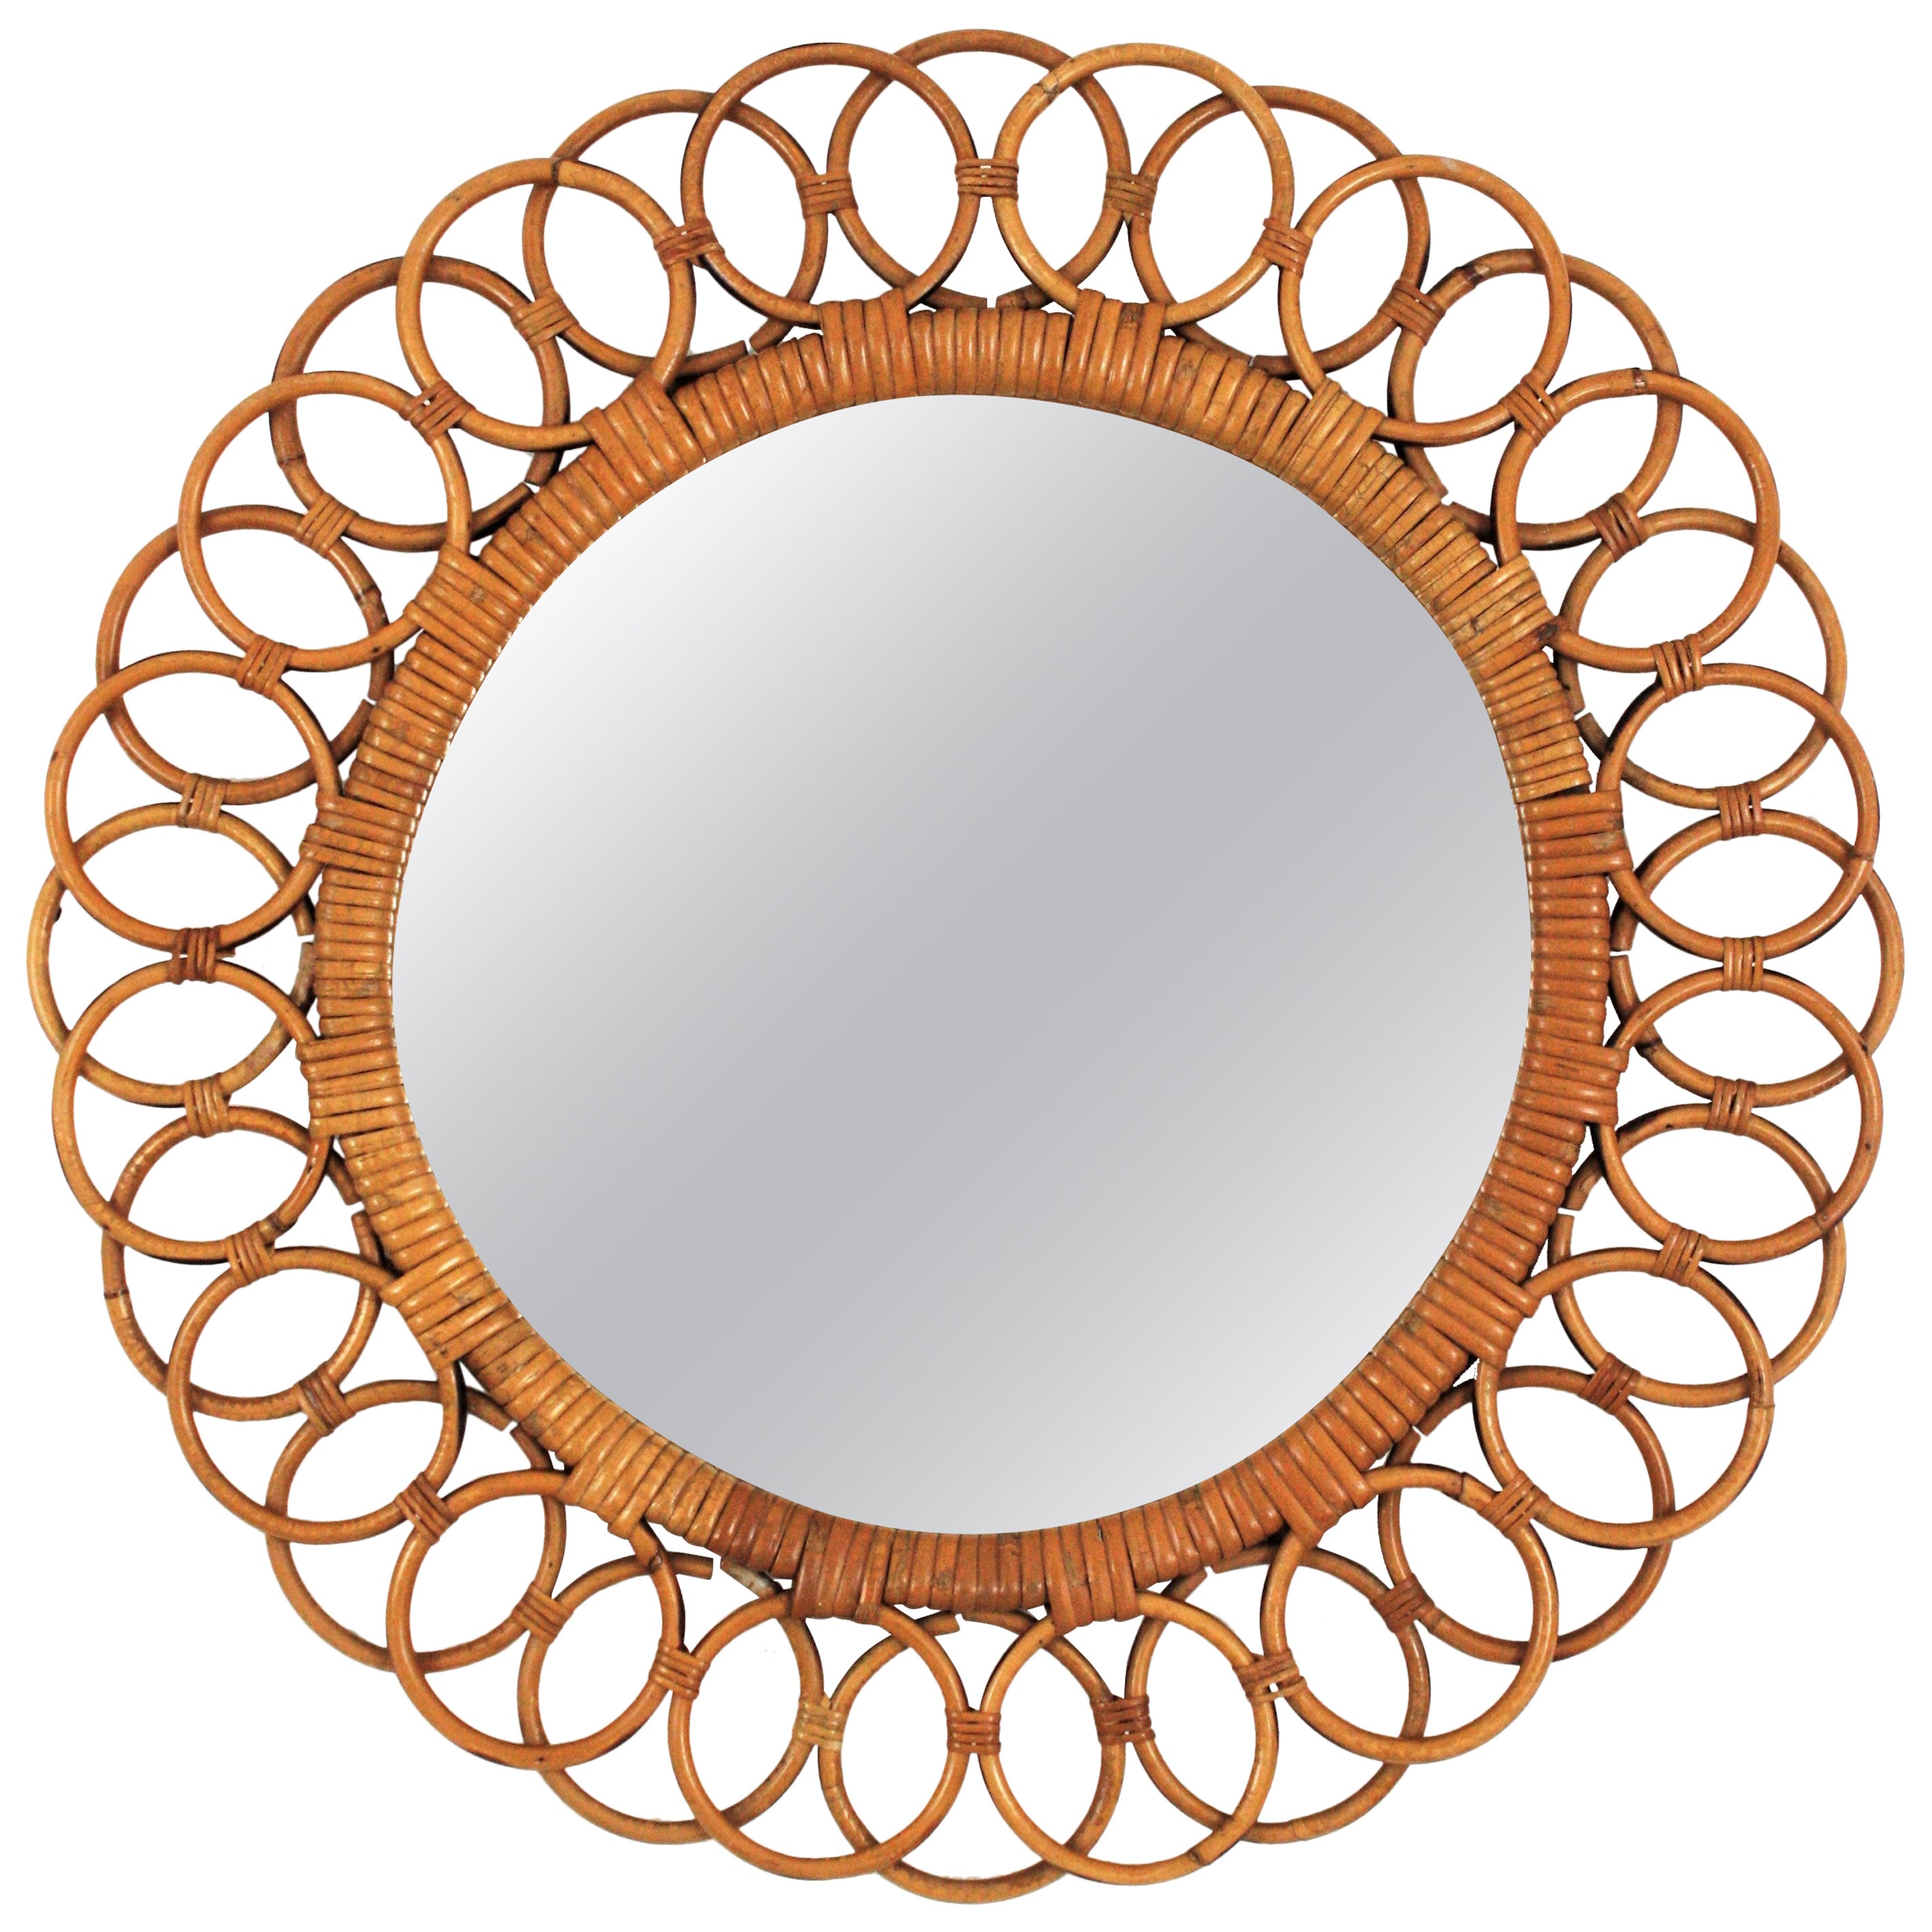 Spanish Rattan Round Mirror with Rings Frame